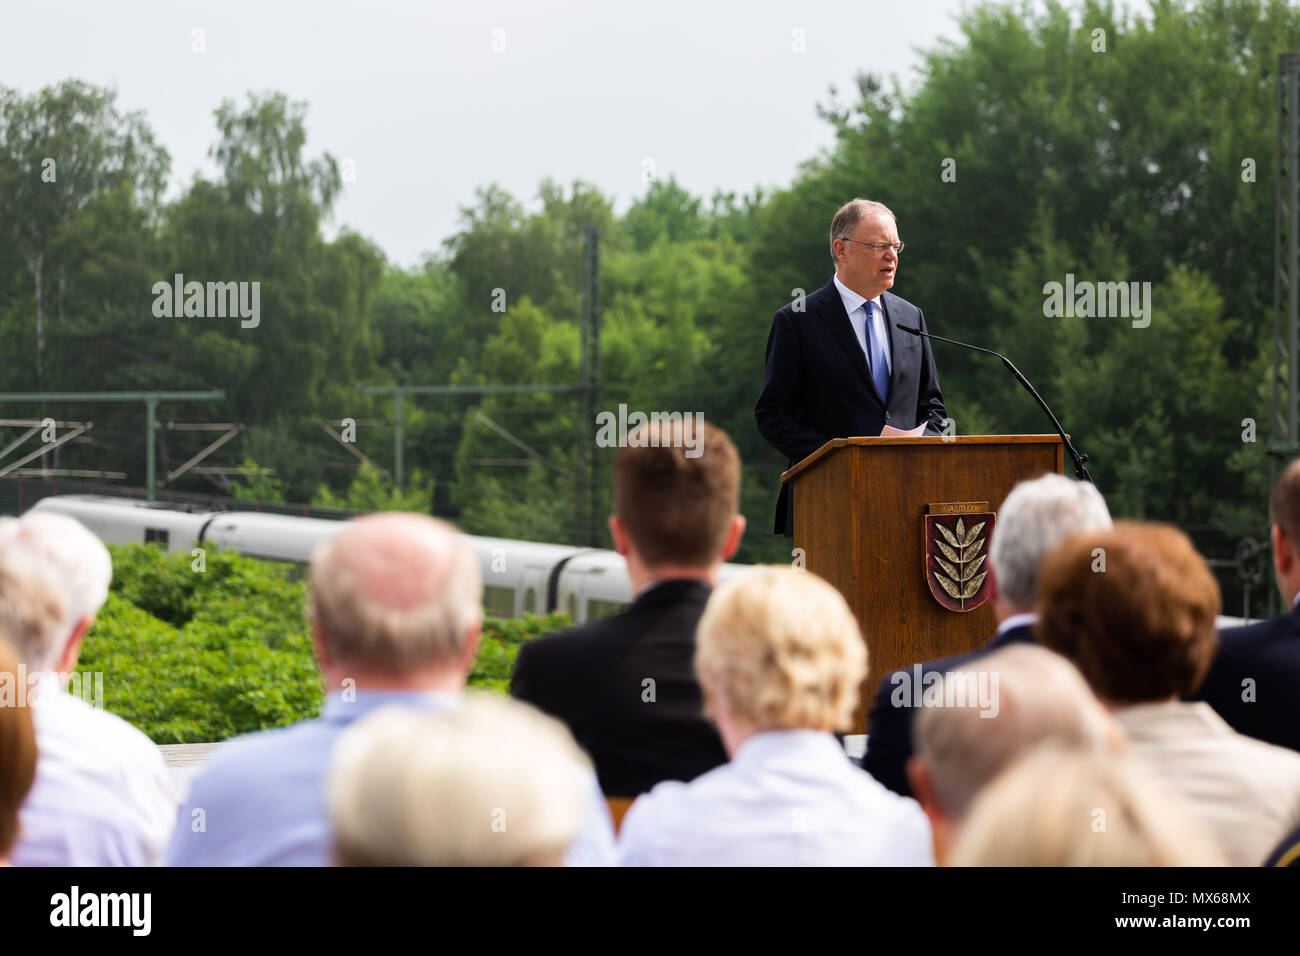 Eschede, Germany. 03 May 2018, Germany, Eschede: The Premier of Lower Saxony from the Social Democratic Party (SPD), Stephan Weil, speaking during the 20th anniversary of the train accident in Eschede. The ICE 'Wilhelm Conrad Roentgen' derailed on the 3 June 1998 at tempo 200 and drove into a highway bridge. 101 people died. Photo: Philipp von Ditfurth/dpa Stock Photo